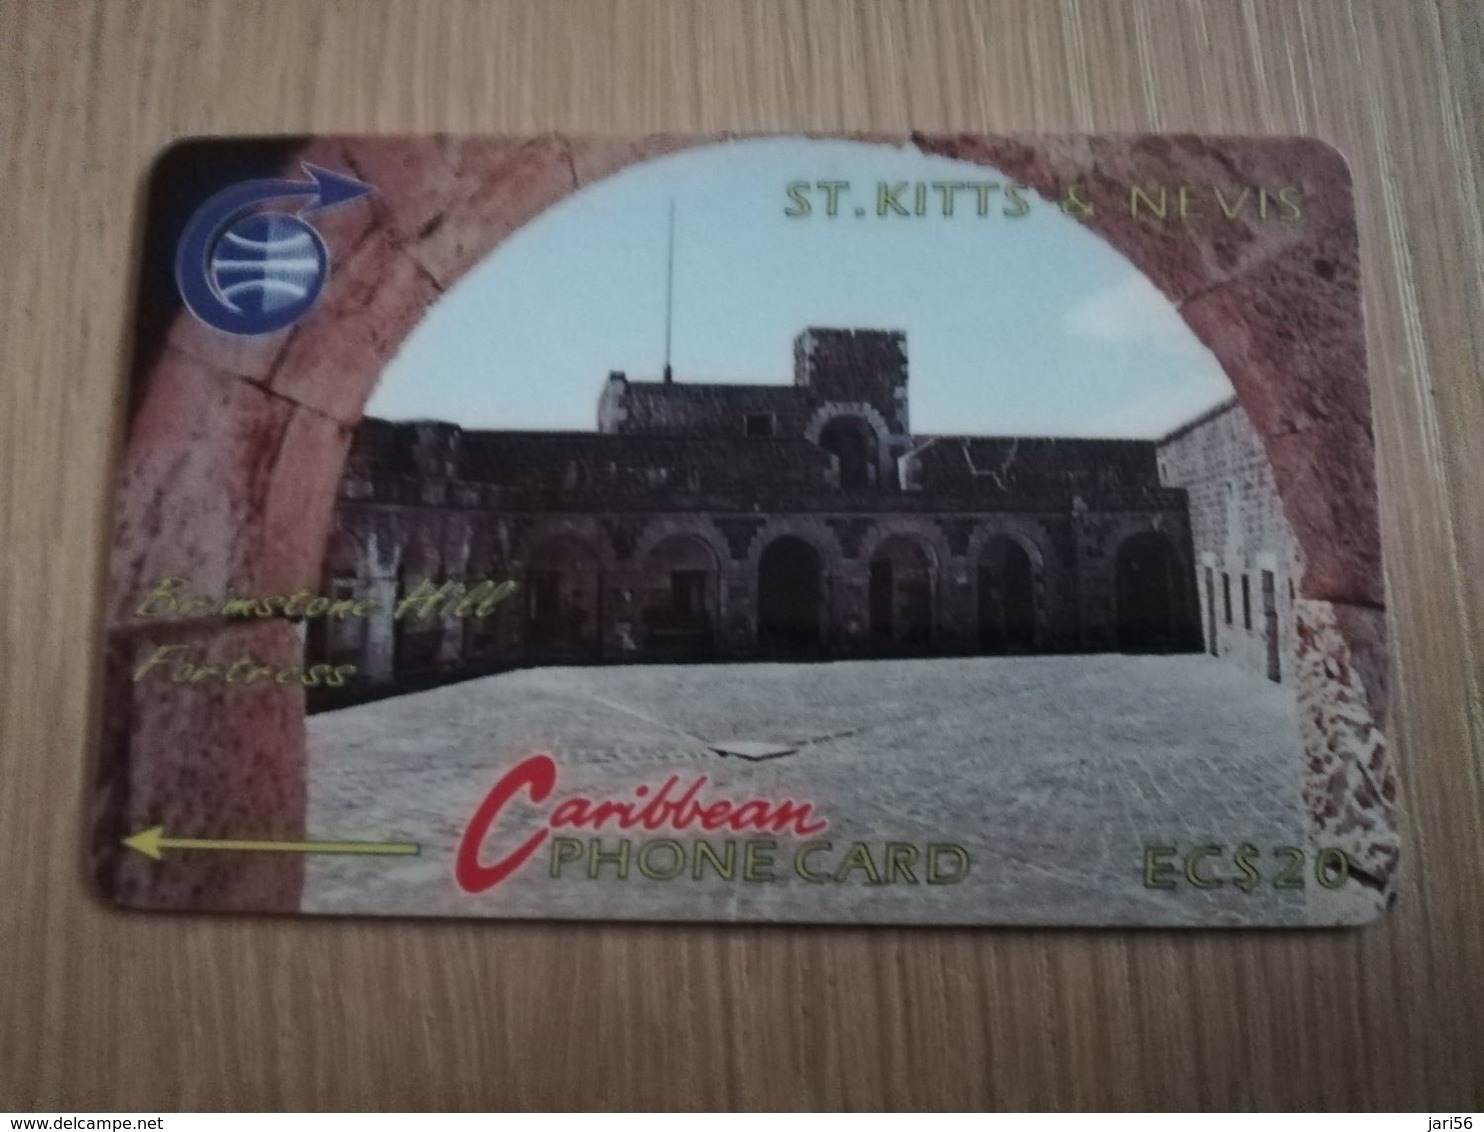 ST KITTS & NEVIS   GPT CARD $20,-   3CSKC     NO STK-3C   BRIMSTONE HILL FORTRESS  2    Fine Used Card  **2330** - St. Kitts & Nevis